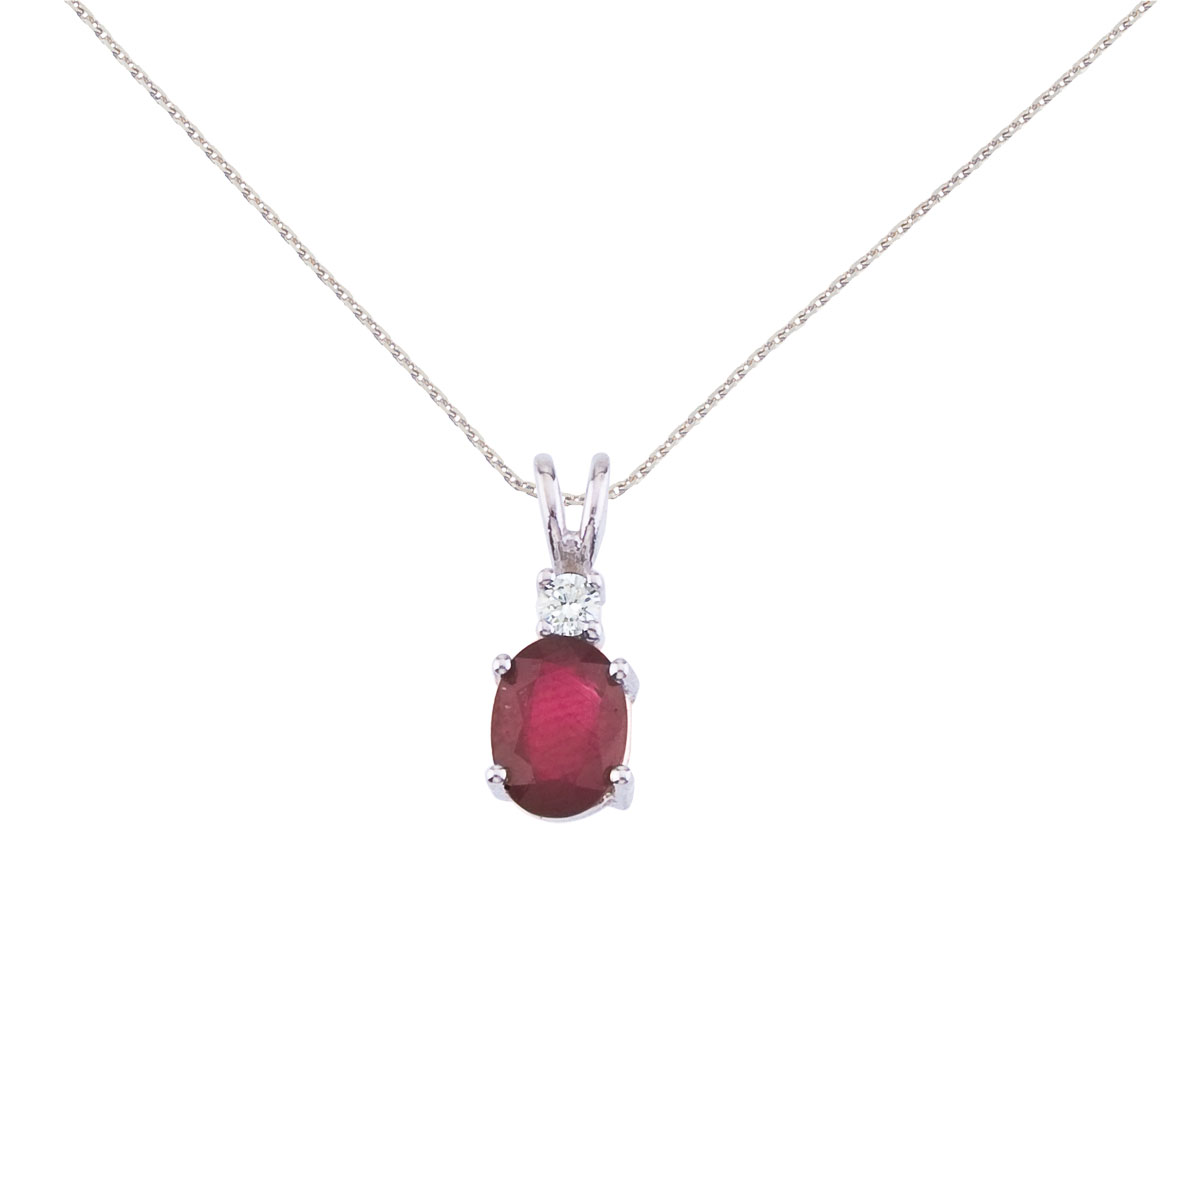 7x5 mm natural ruby and diamond pendant set in 14k white gold.